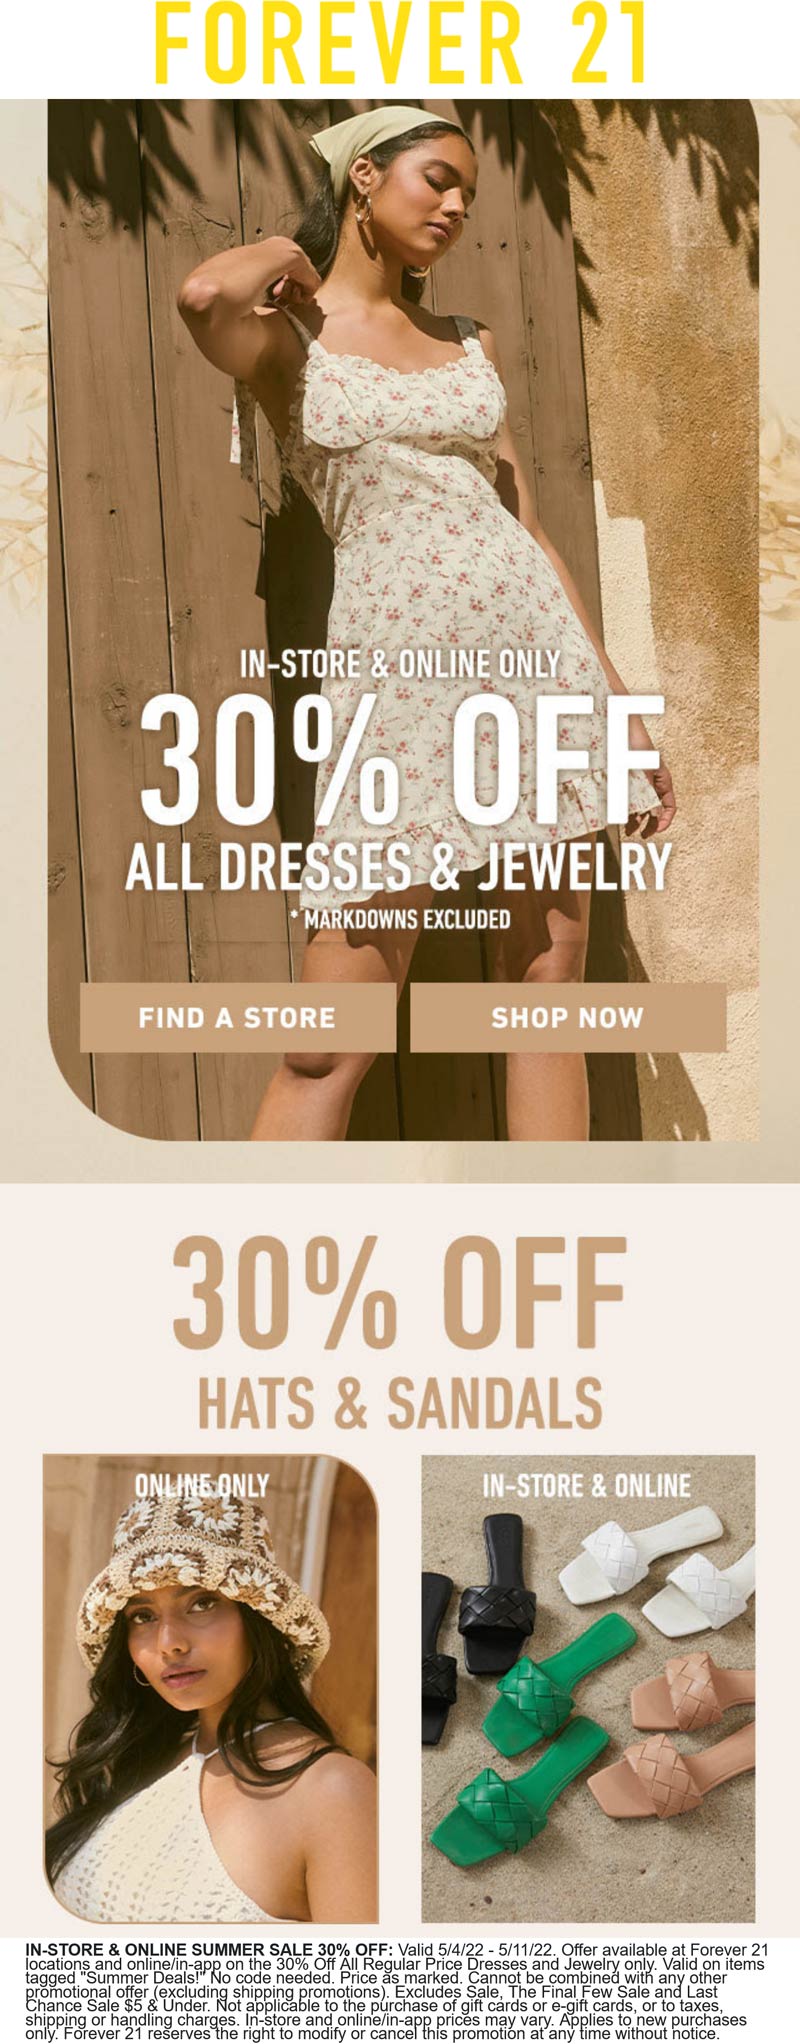 Forever 21 stores Coupon  30% off dresses & jewelry today at Forever 21, ditto online #forever21 